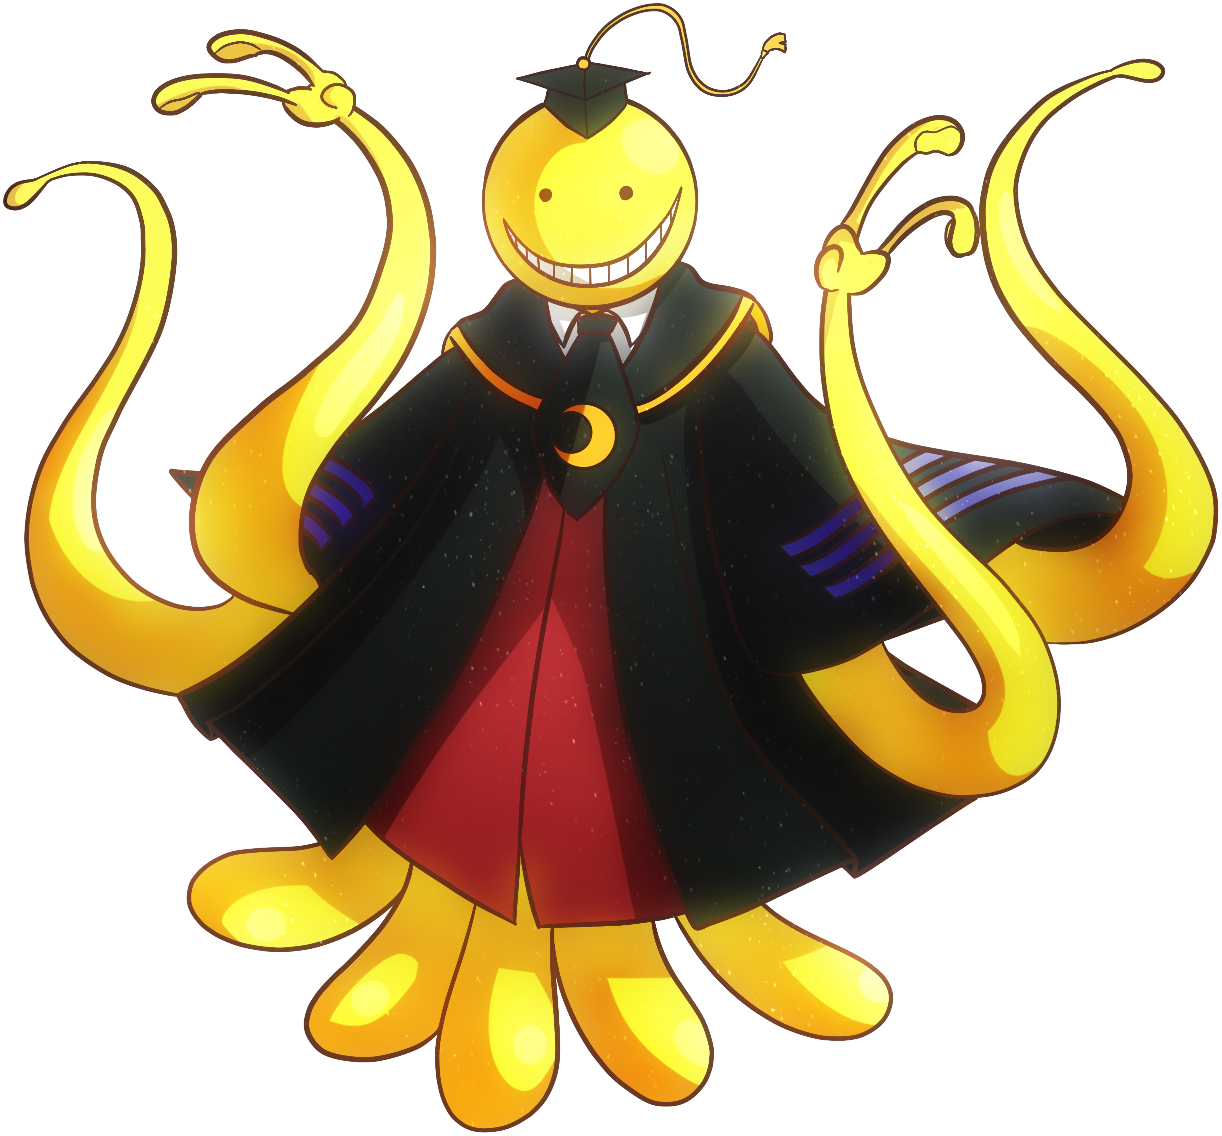 A while back I decided to try and doodle Koro : r/Korosensei